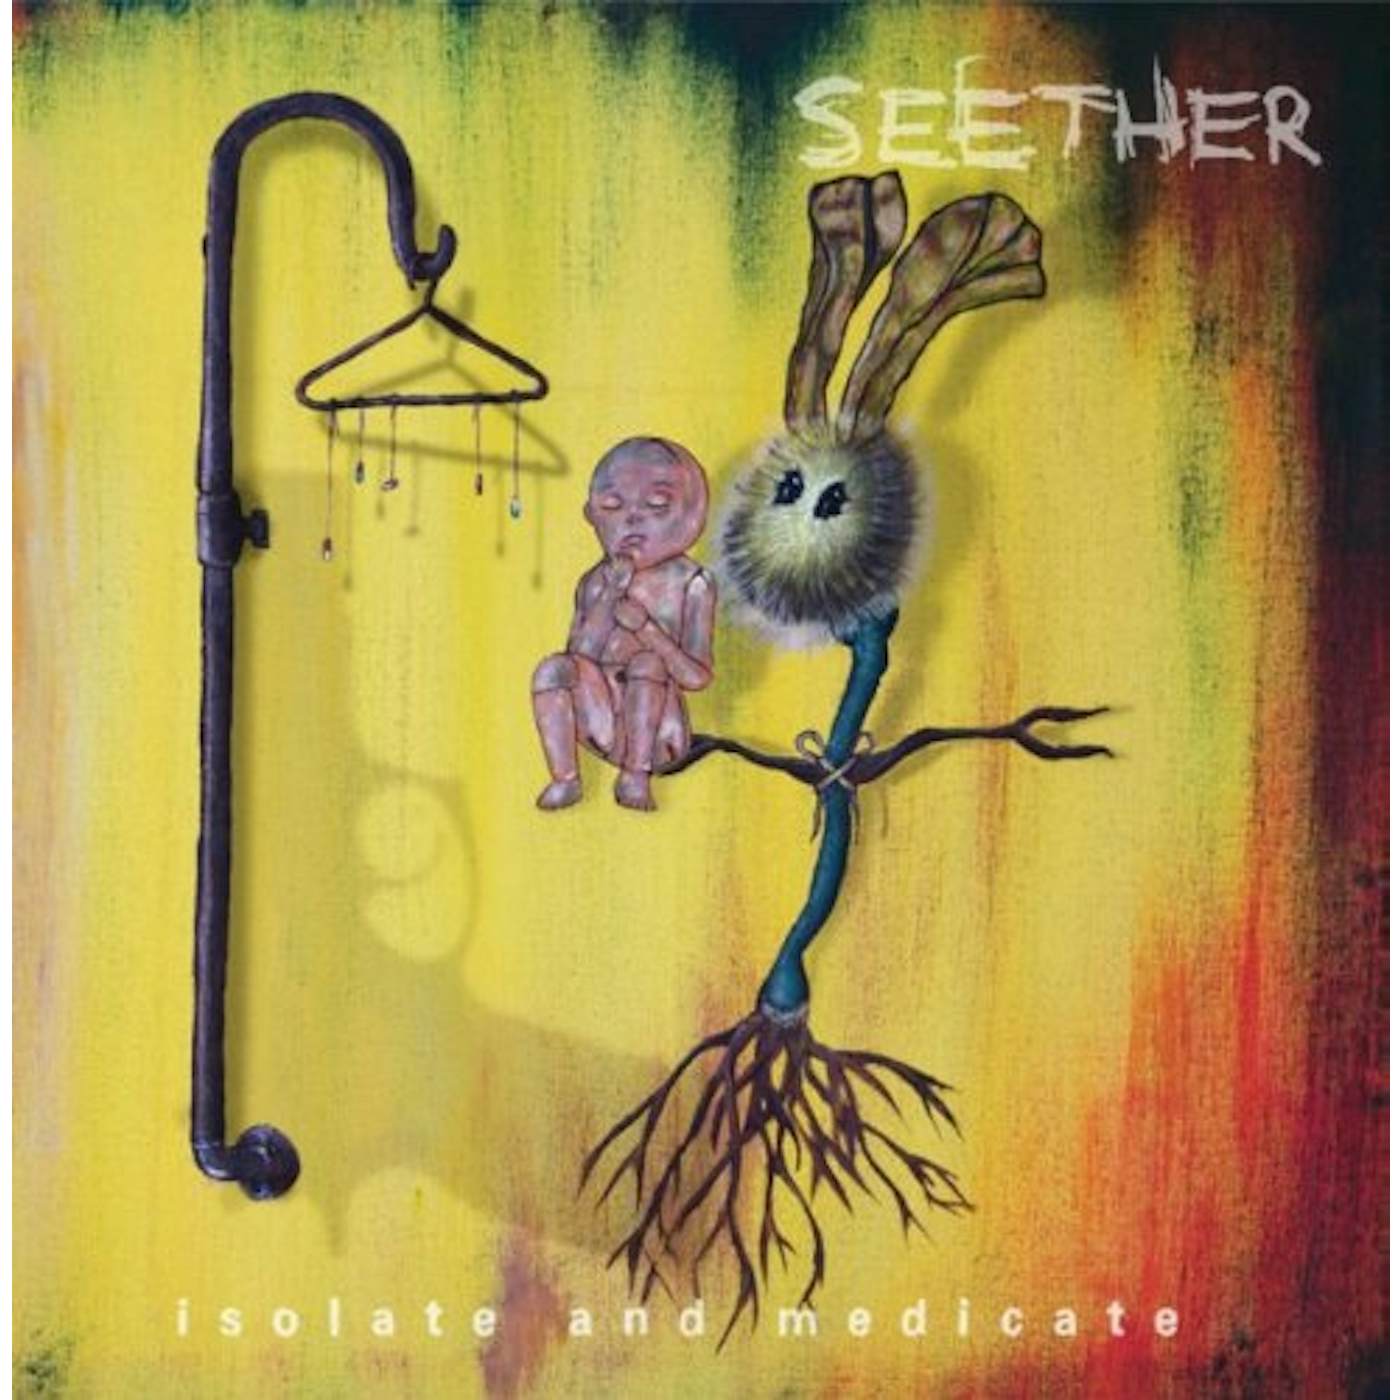 Seether ISOLATE & MEDICATE CD